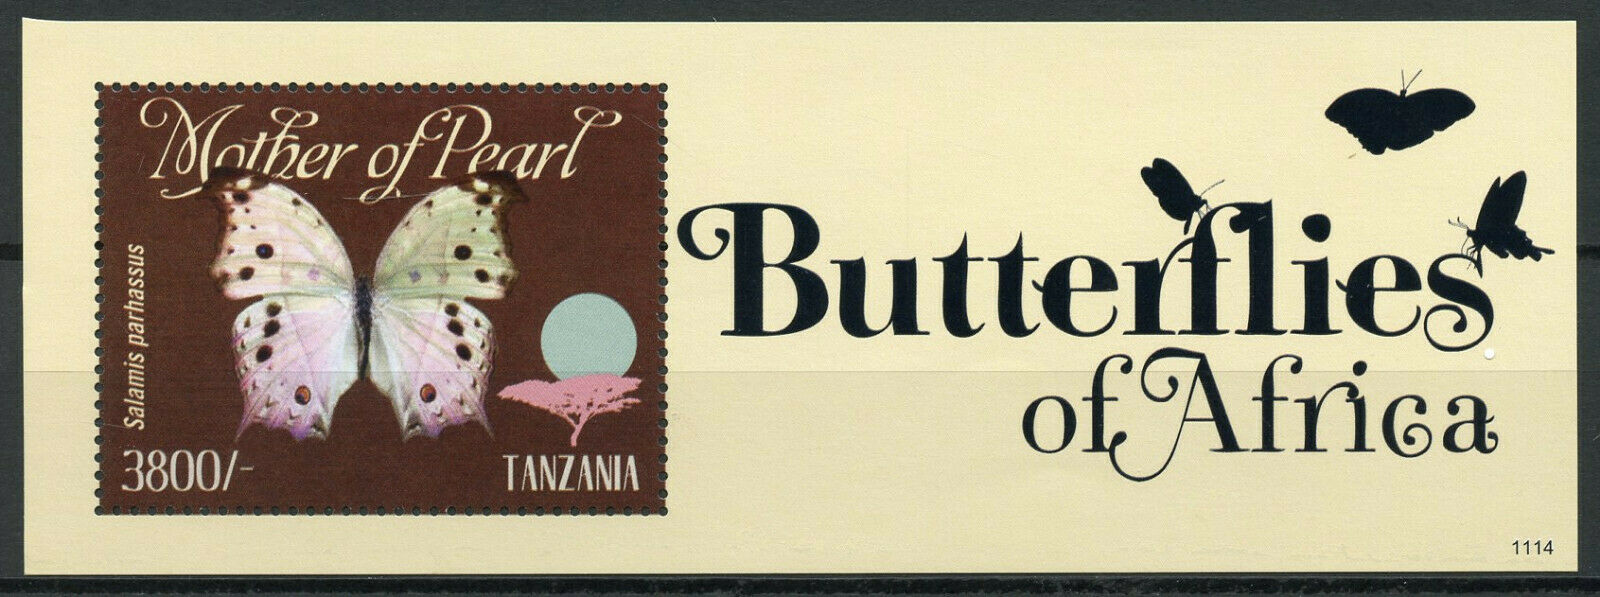 Tanzania Butterfly Stamps 2011 MNH Butterflies of Africa Mother Pearl 1v S/S I